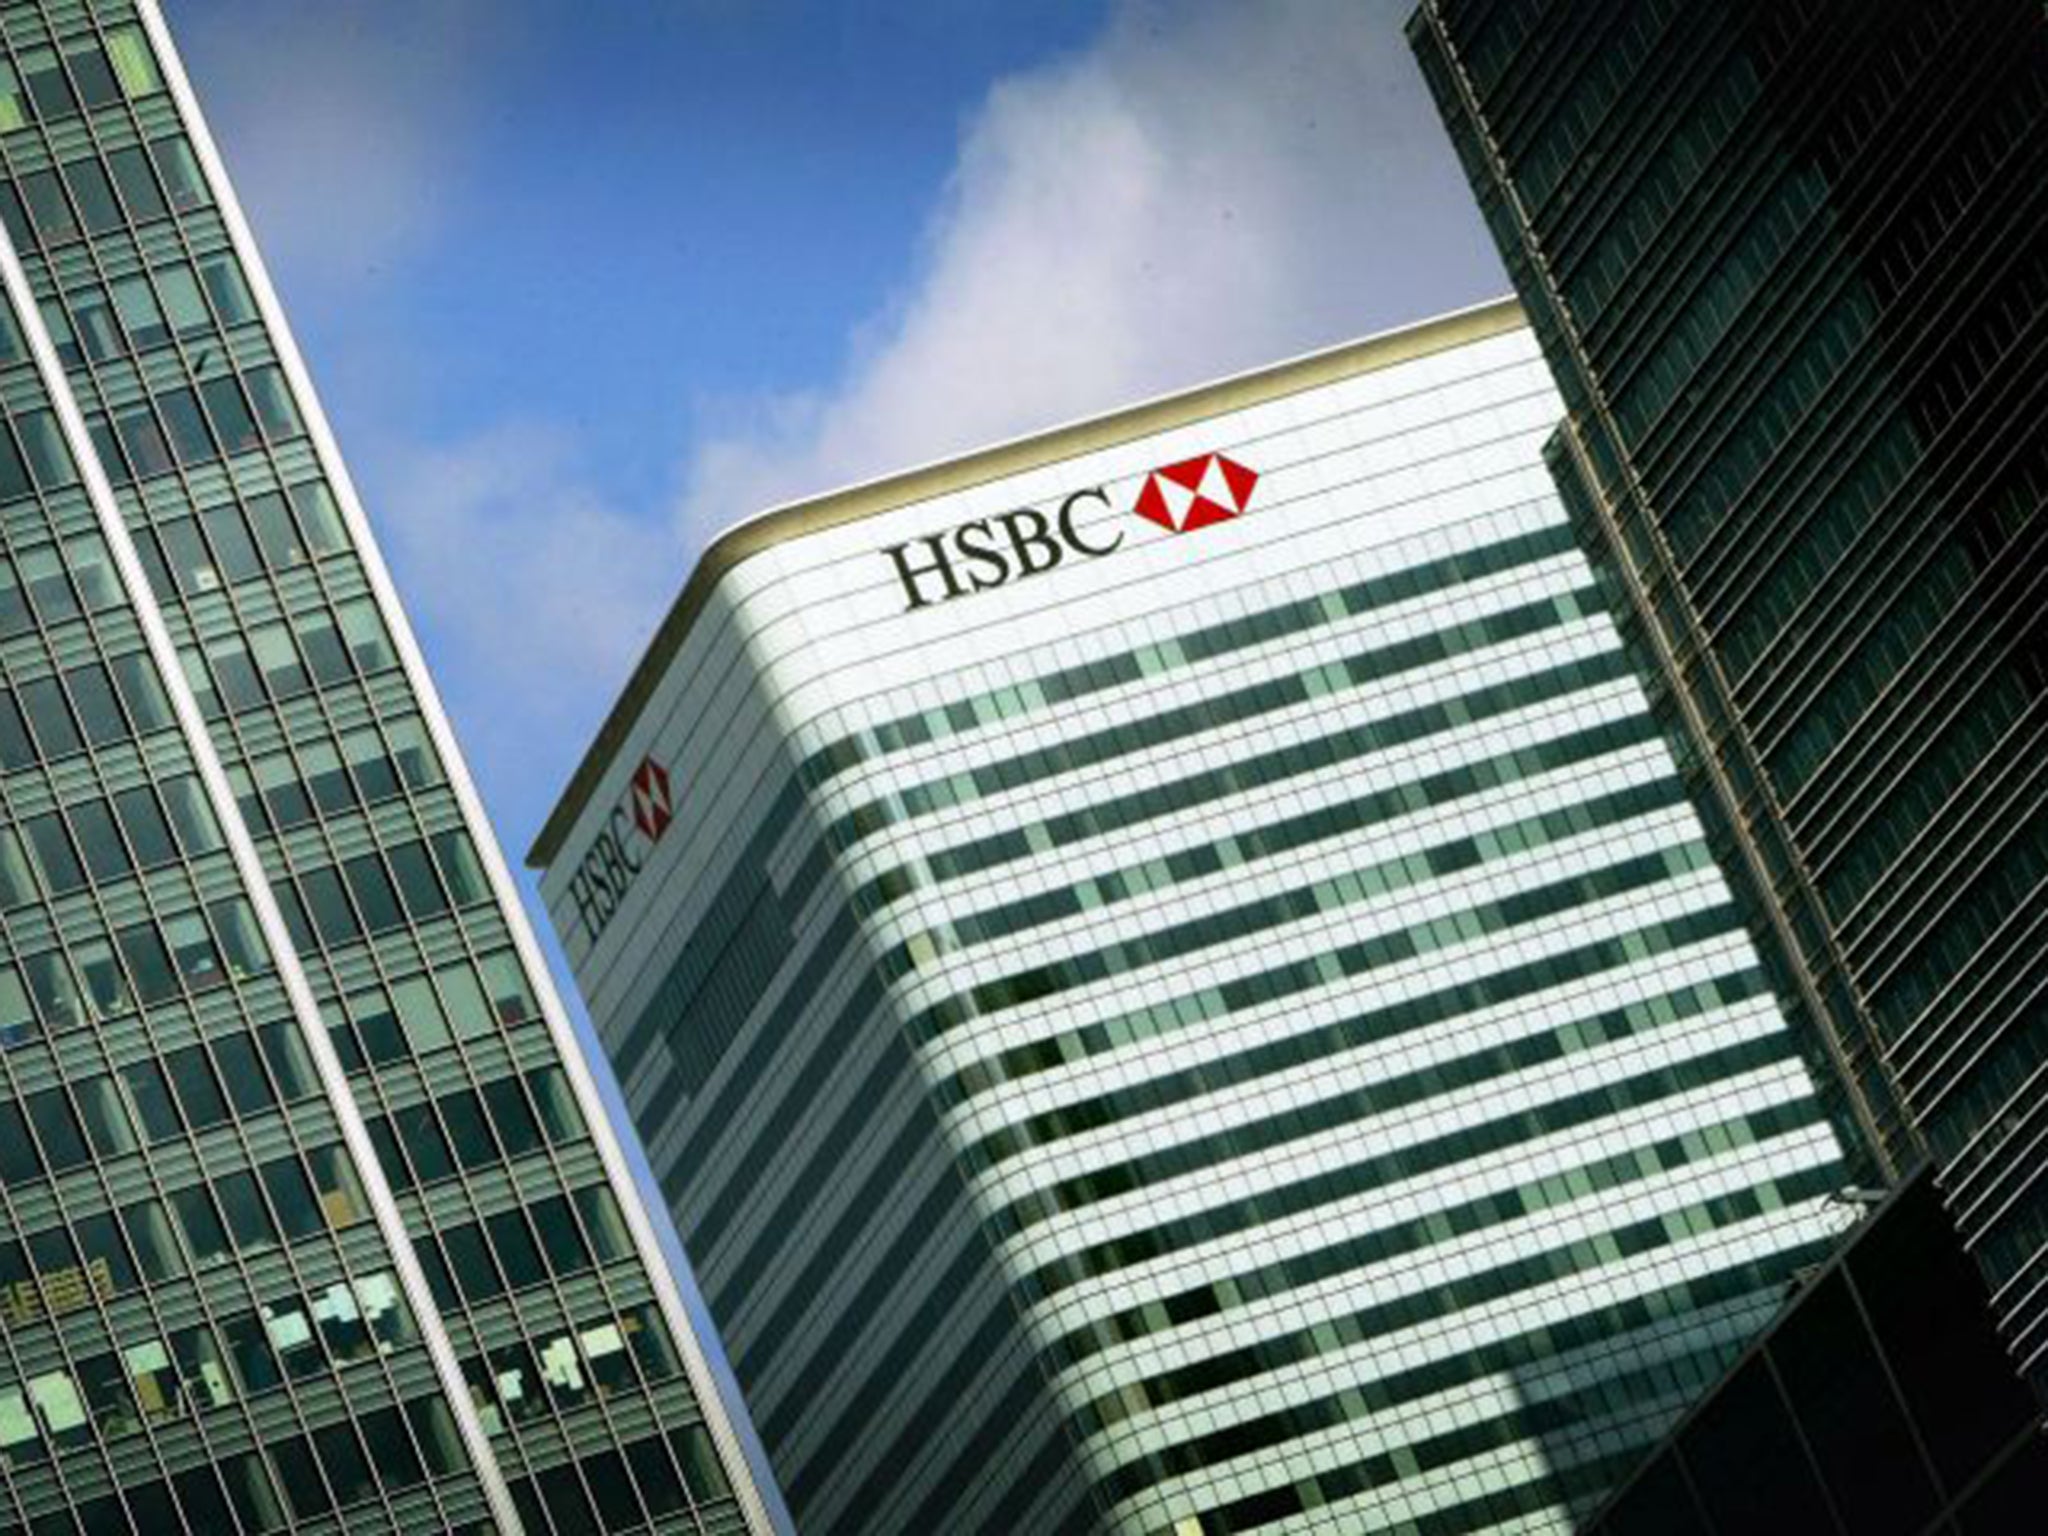 HSBC was found to have helped customers conceal assets and dodge taxes earlier this year